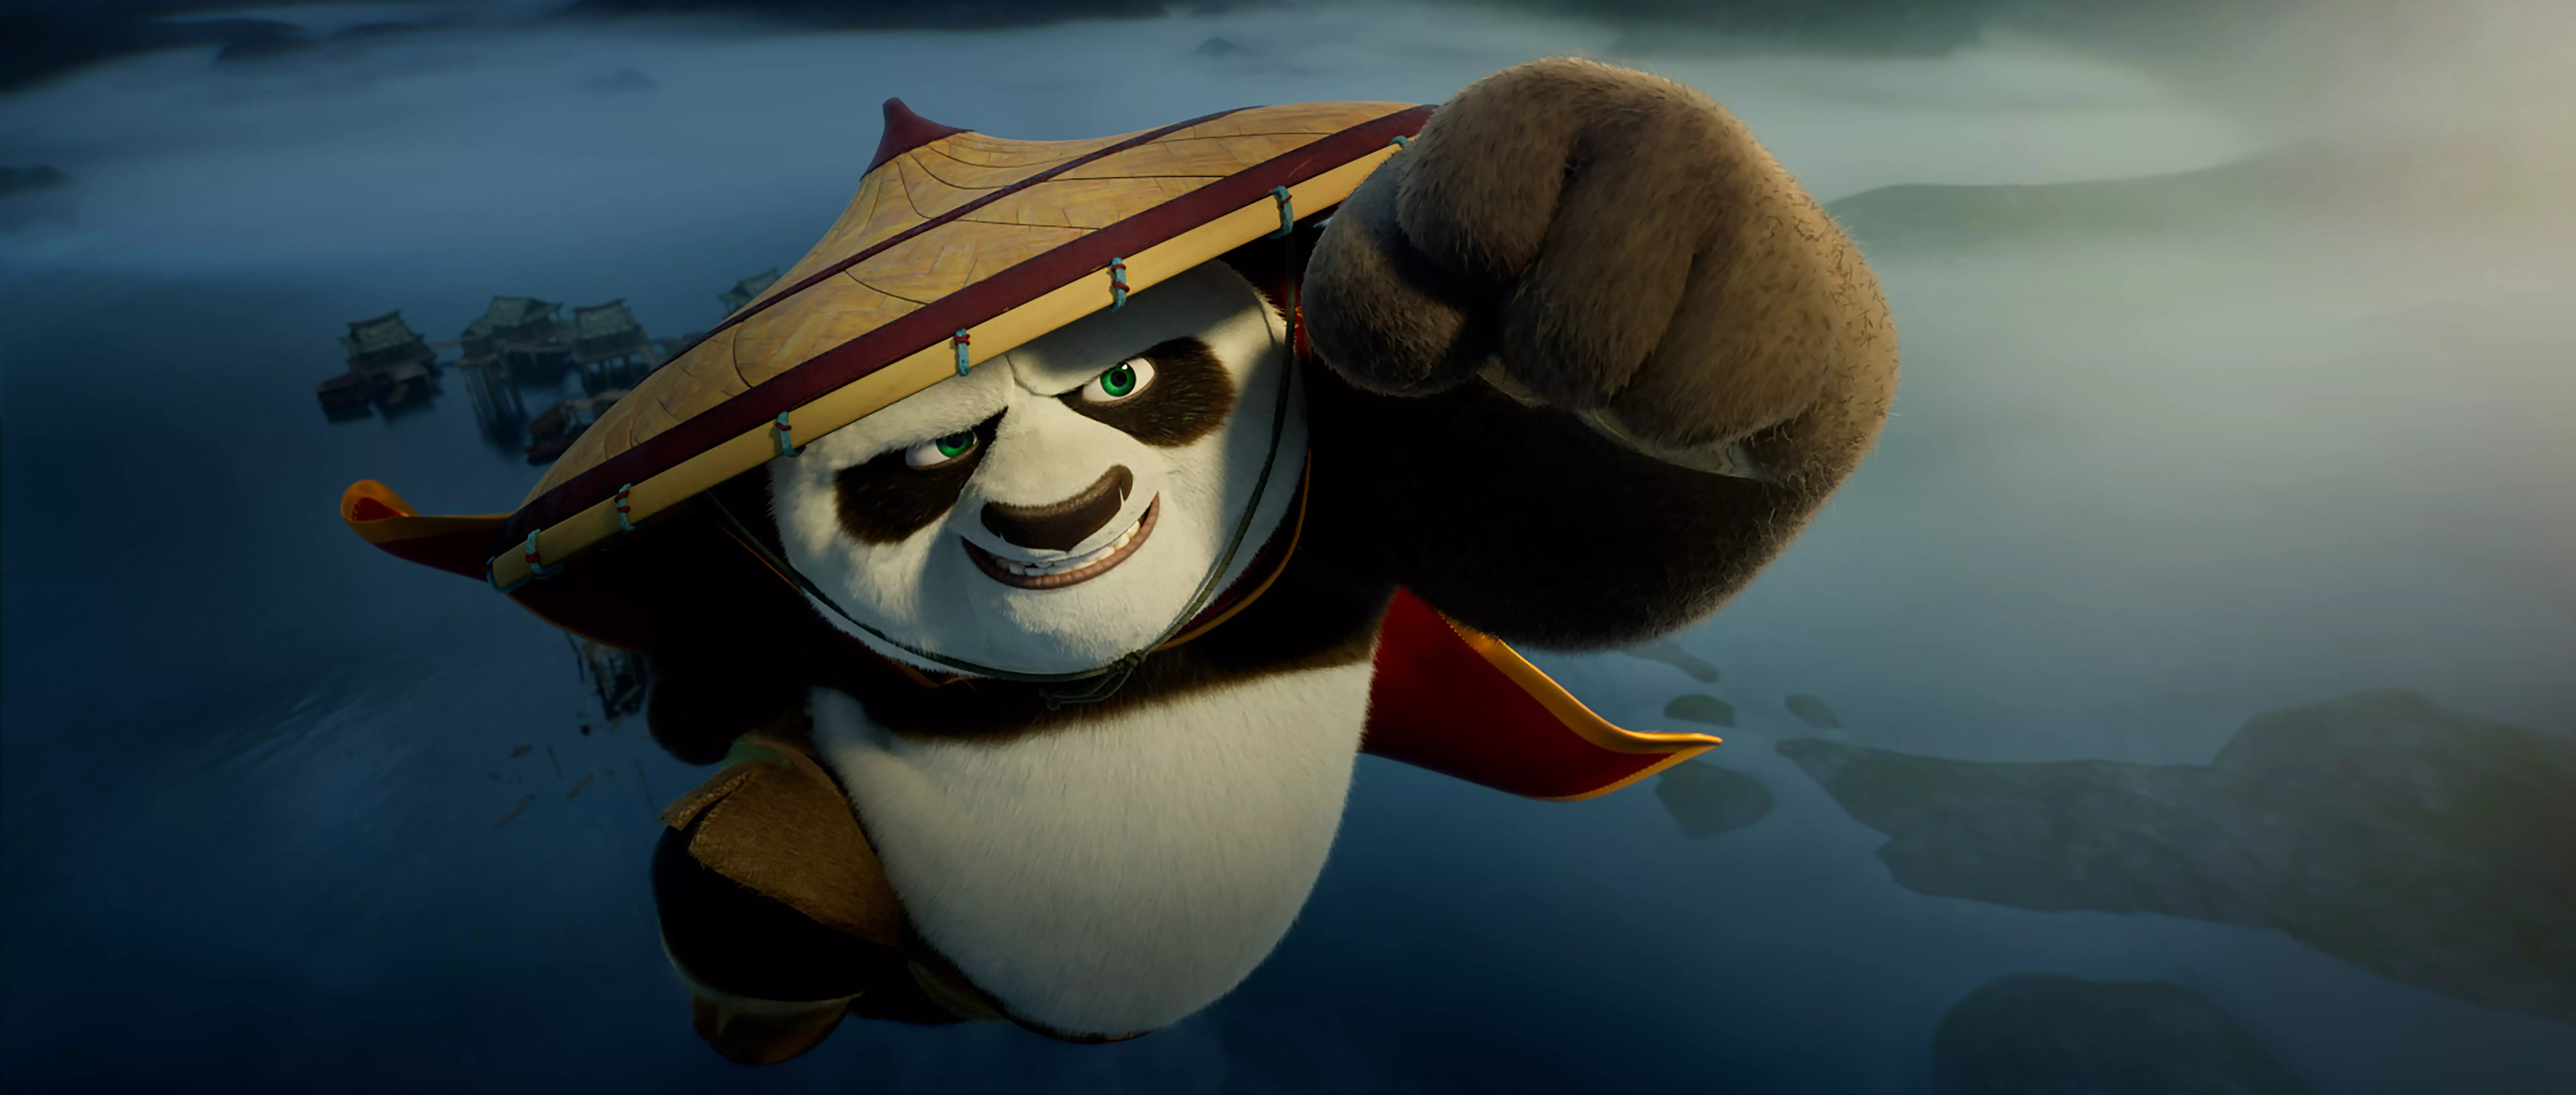 Furry martial-arts warrior Po (voiced by Jack Black) tackles an evil shapeshifting lizard in the animated adventure "Kung Fu Panda 4."